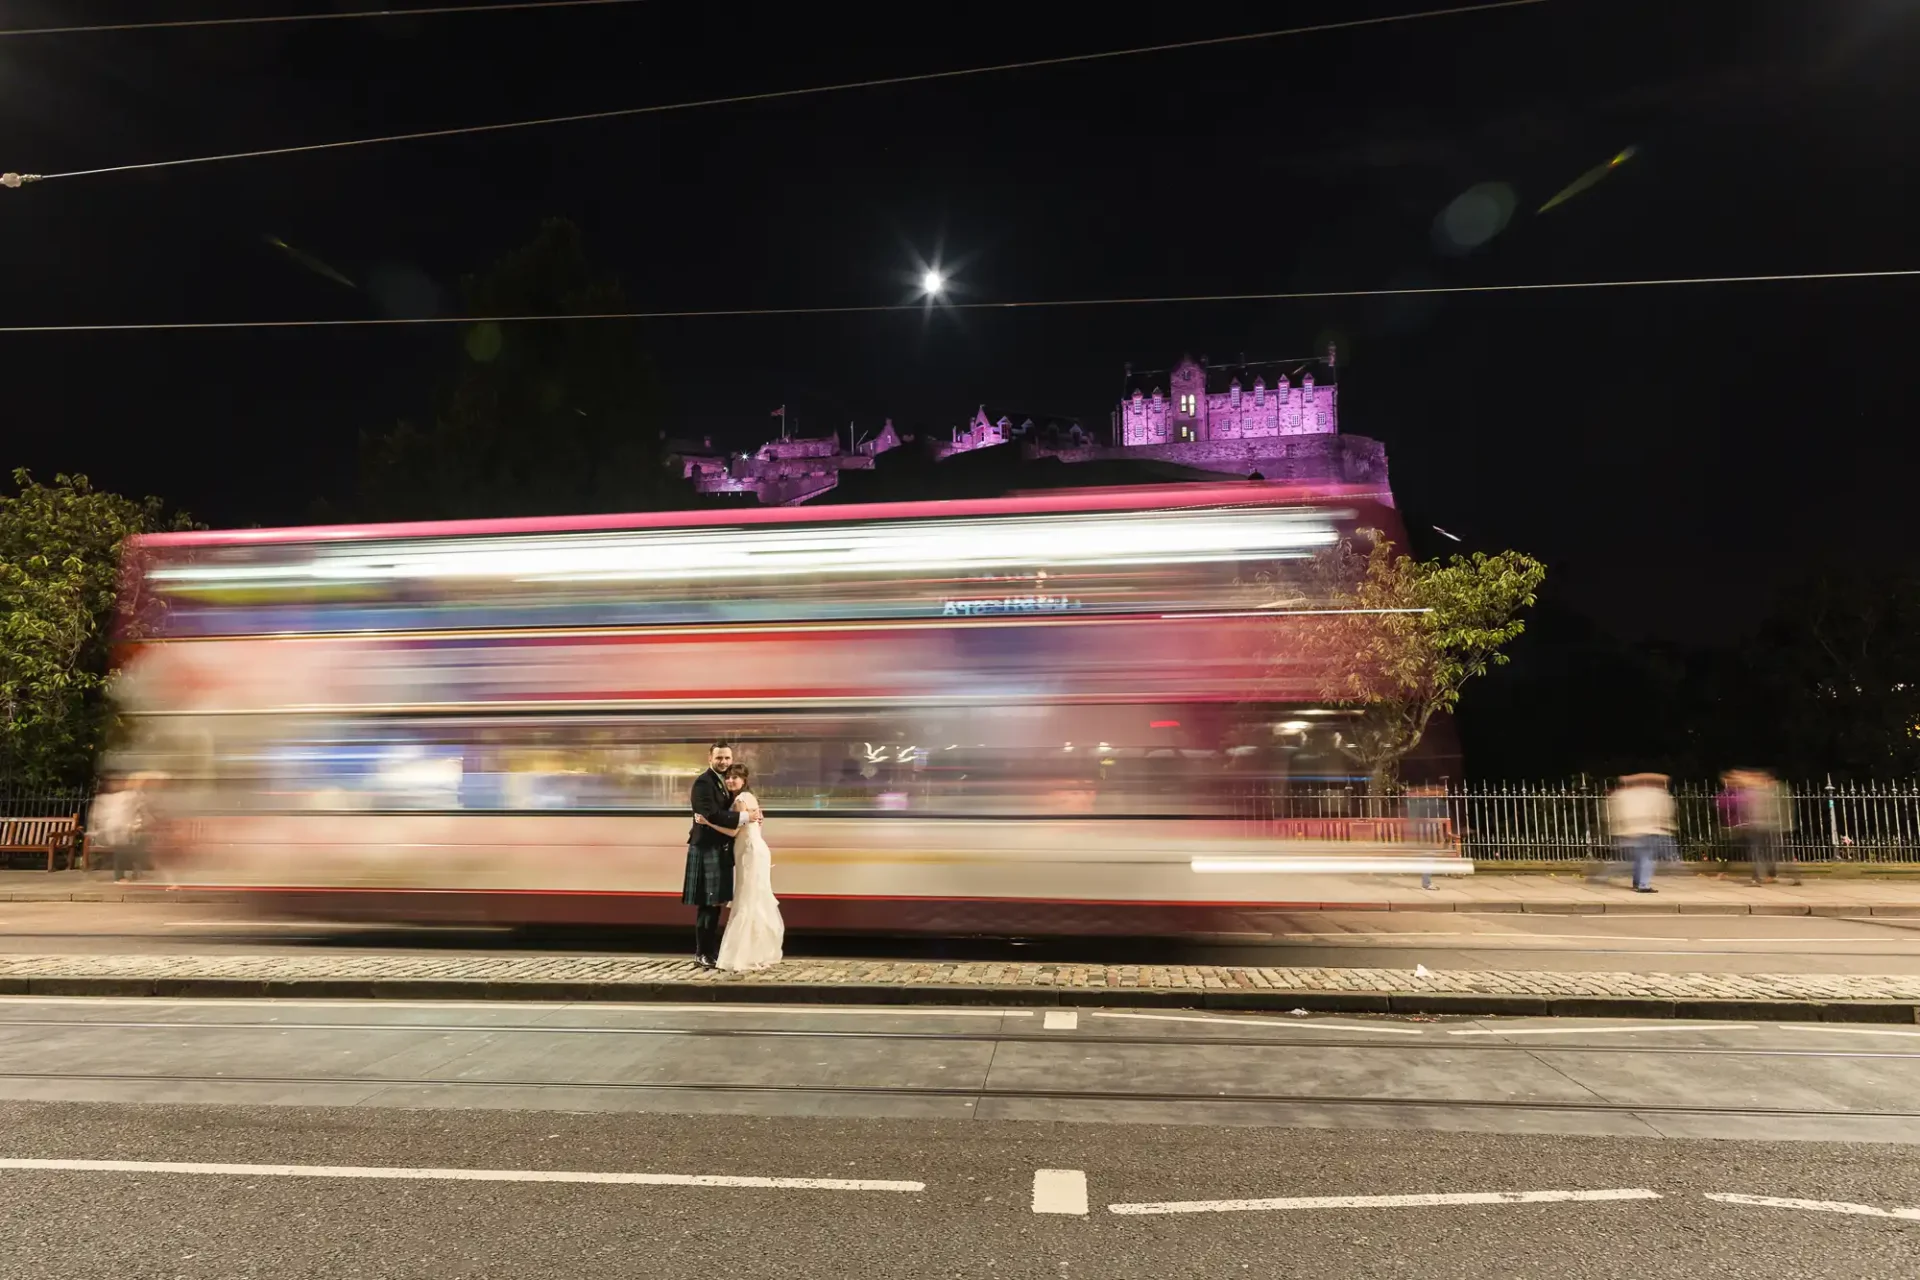 A couple embracing in front of a blurred city bus at night with an illuminated castle on a hill in the background.